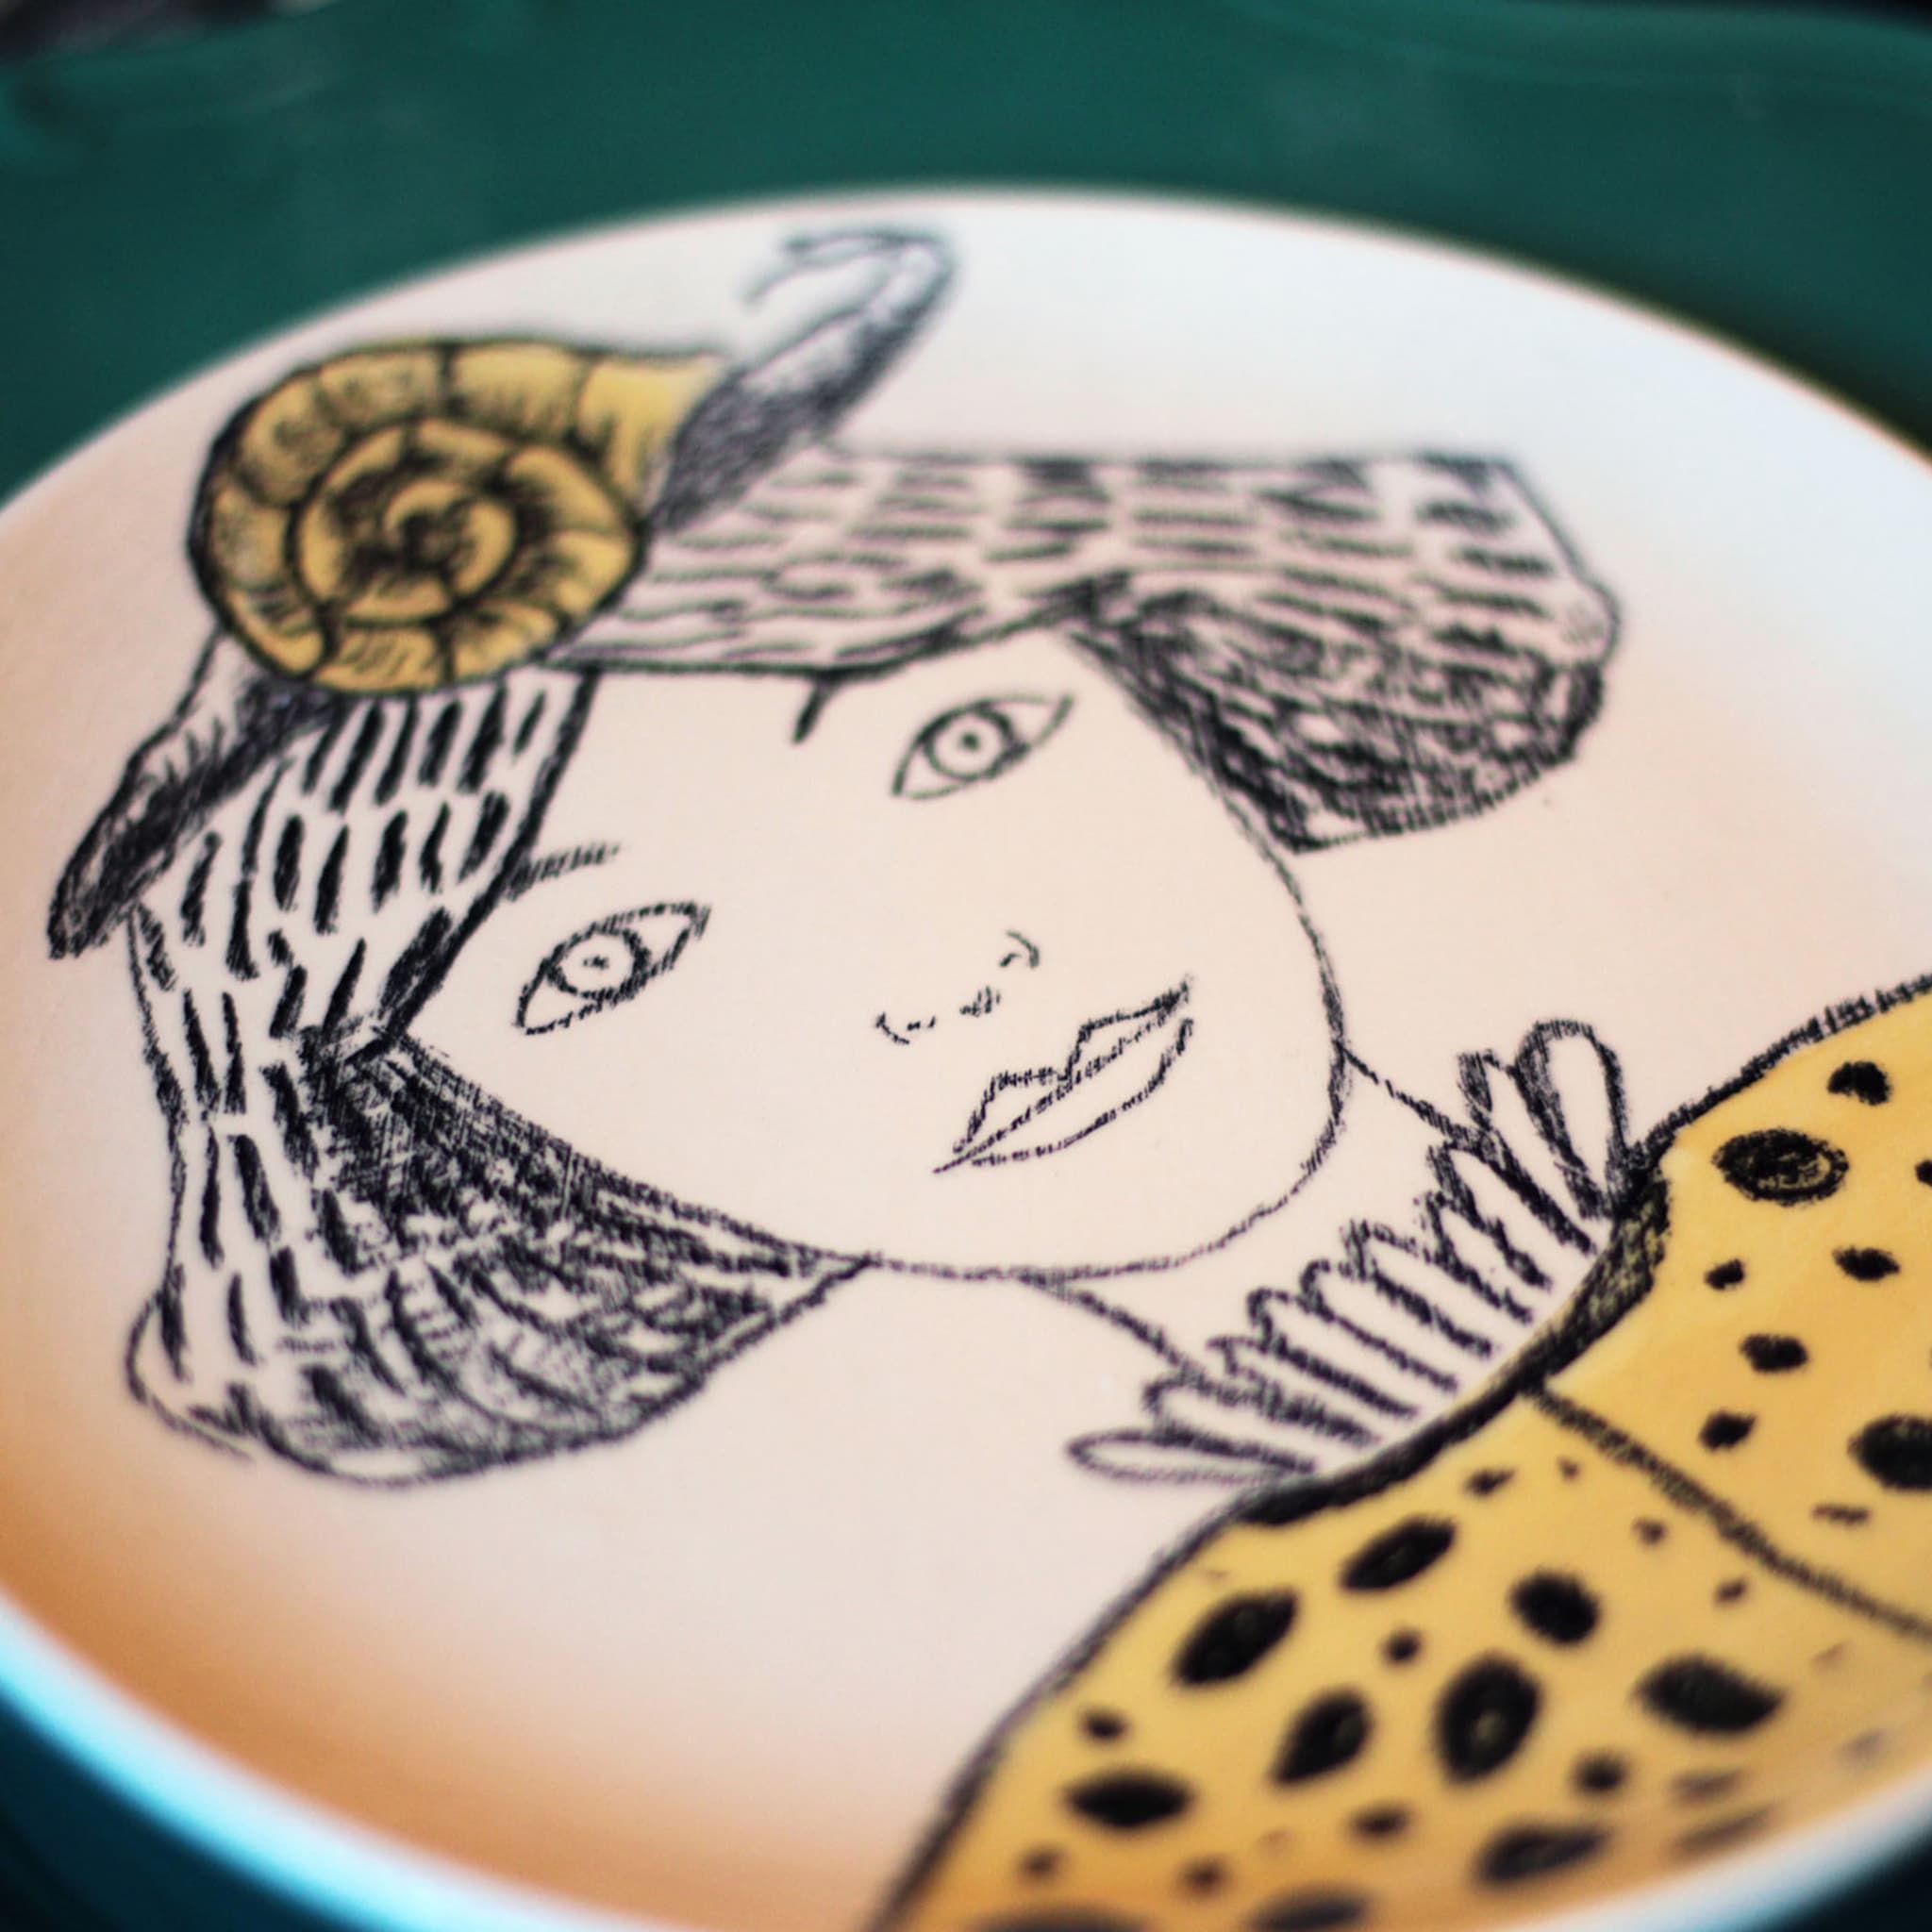 Woman with Snail Decorative Plate - Alternative view 3